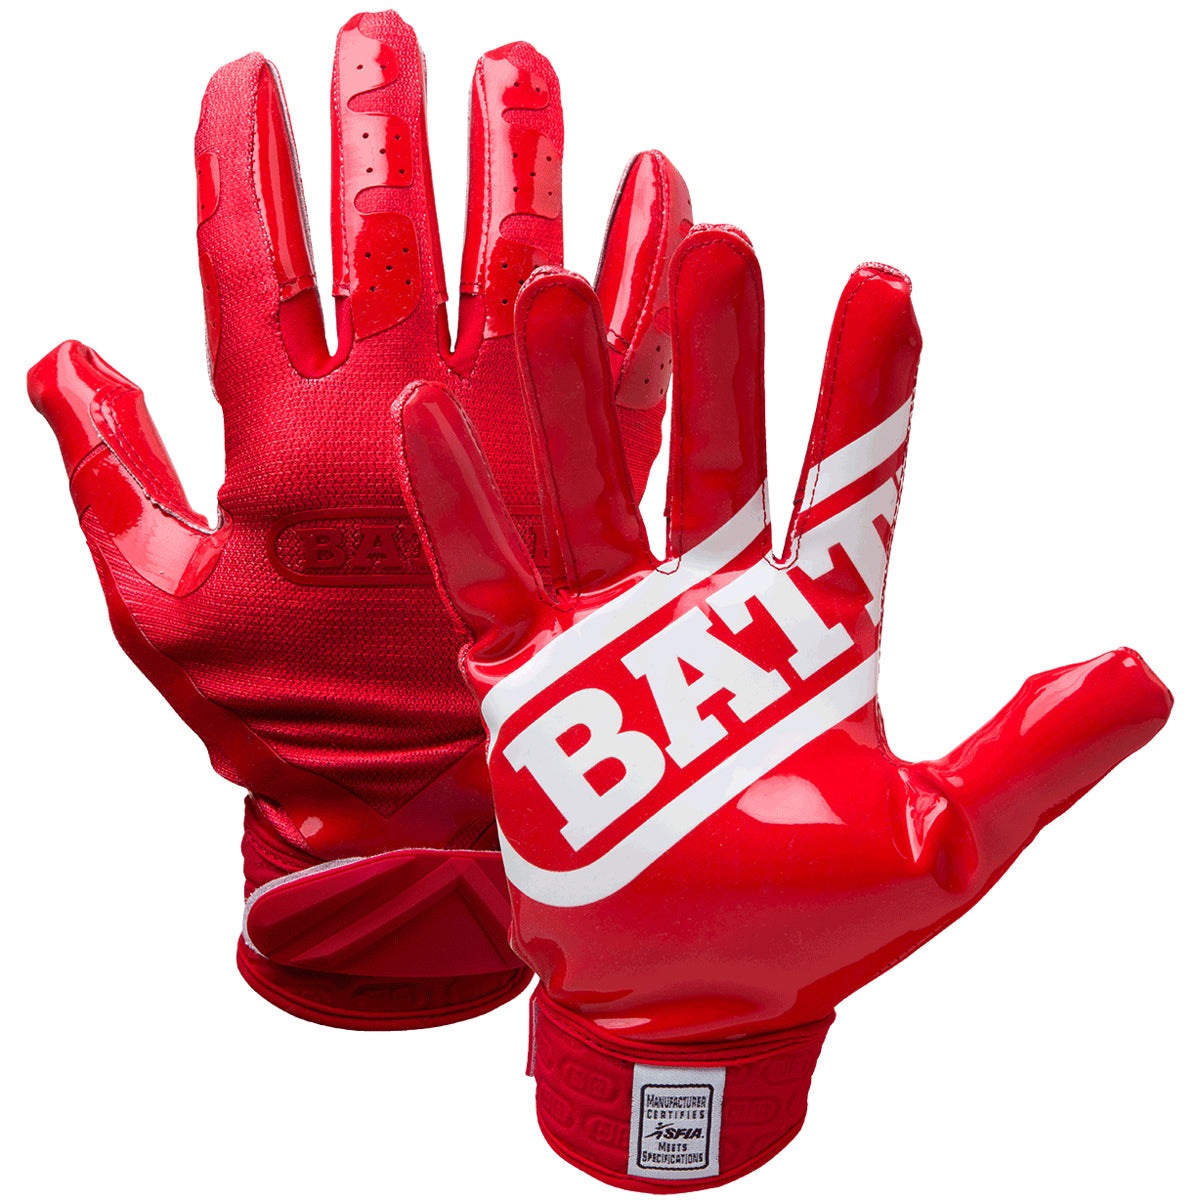 Battle Sports DoubleThreat UltraTack Football Gloves - Red/Red Battle Sports